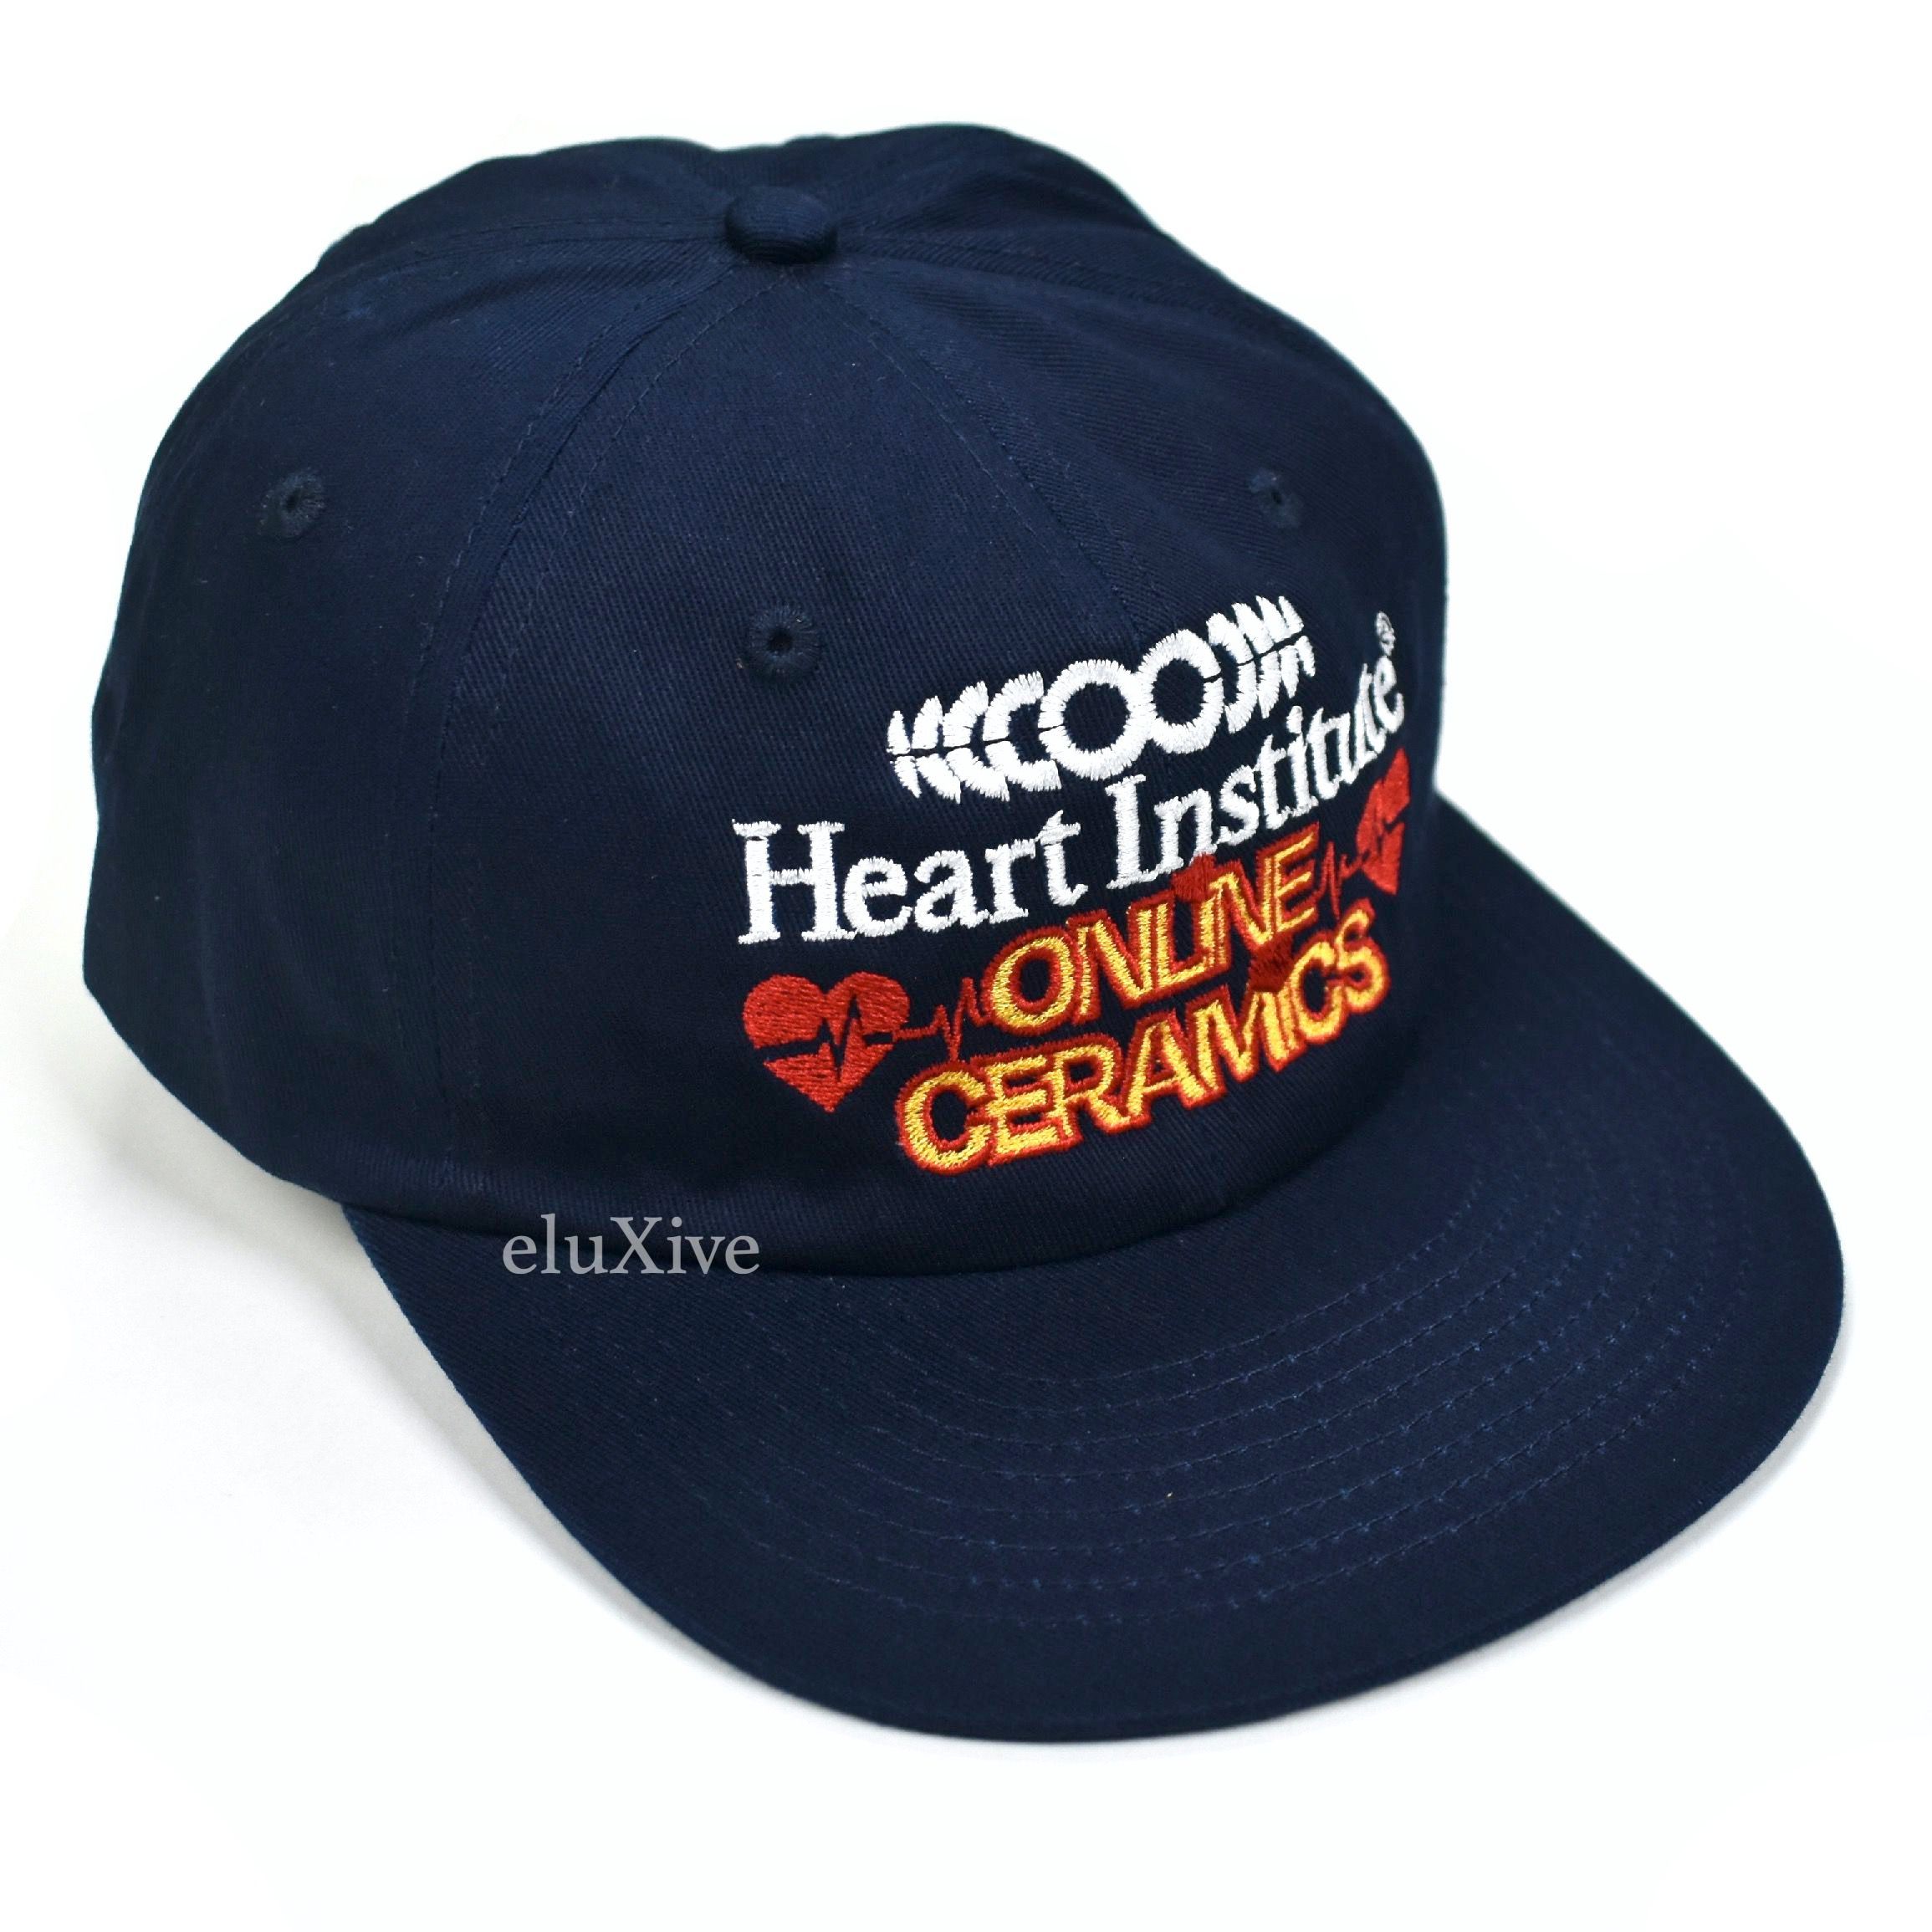 Pre-owned Online Ceramics Heart Institute Hat Navy Ds